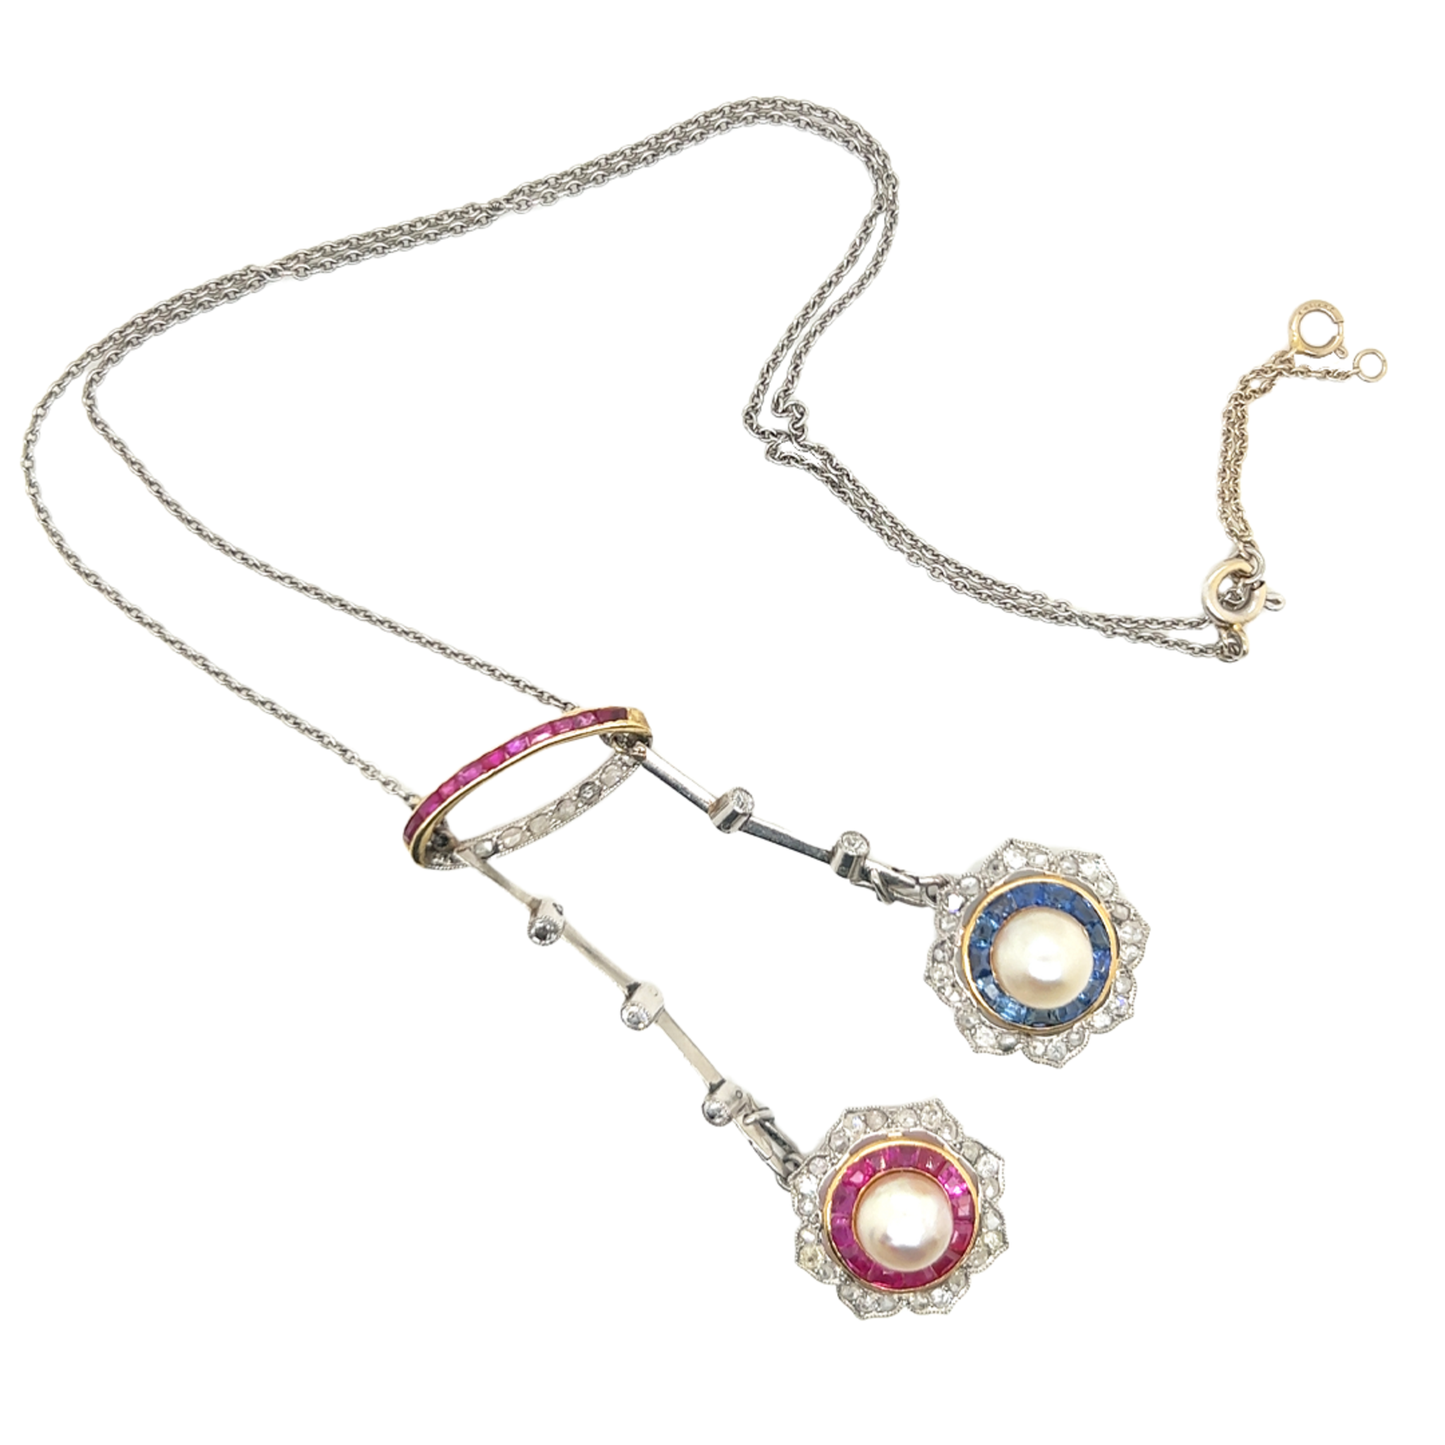 Edwardian Platinum & 18KT Yellow Gold Natural Pearl, Diamond, Ruby & Sapphire Necklace front